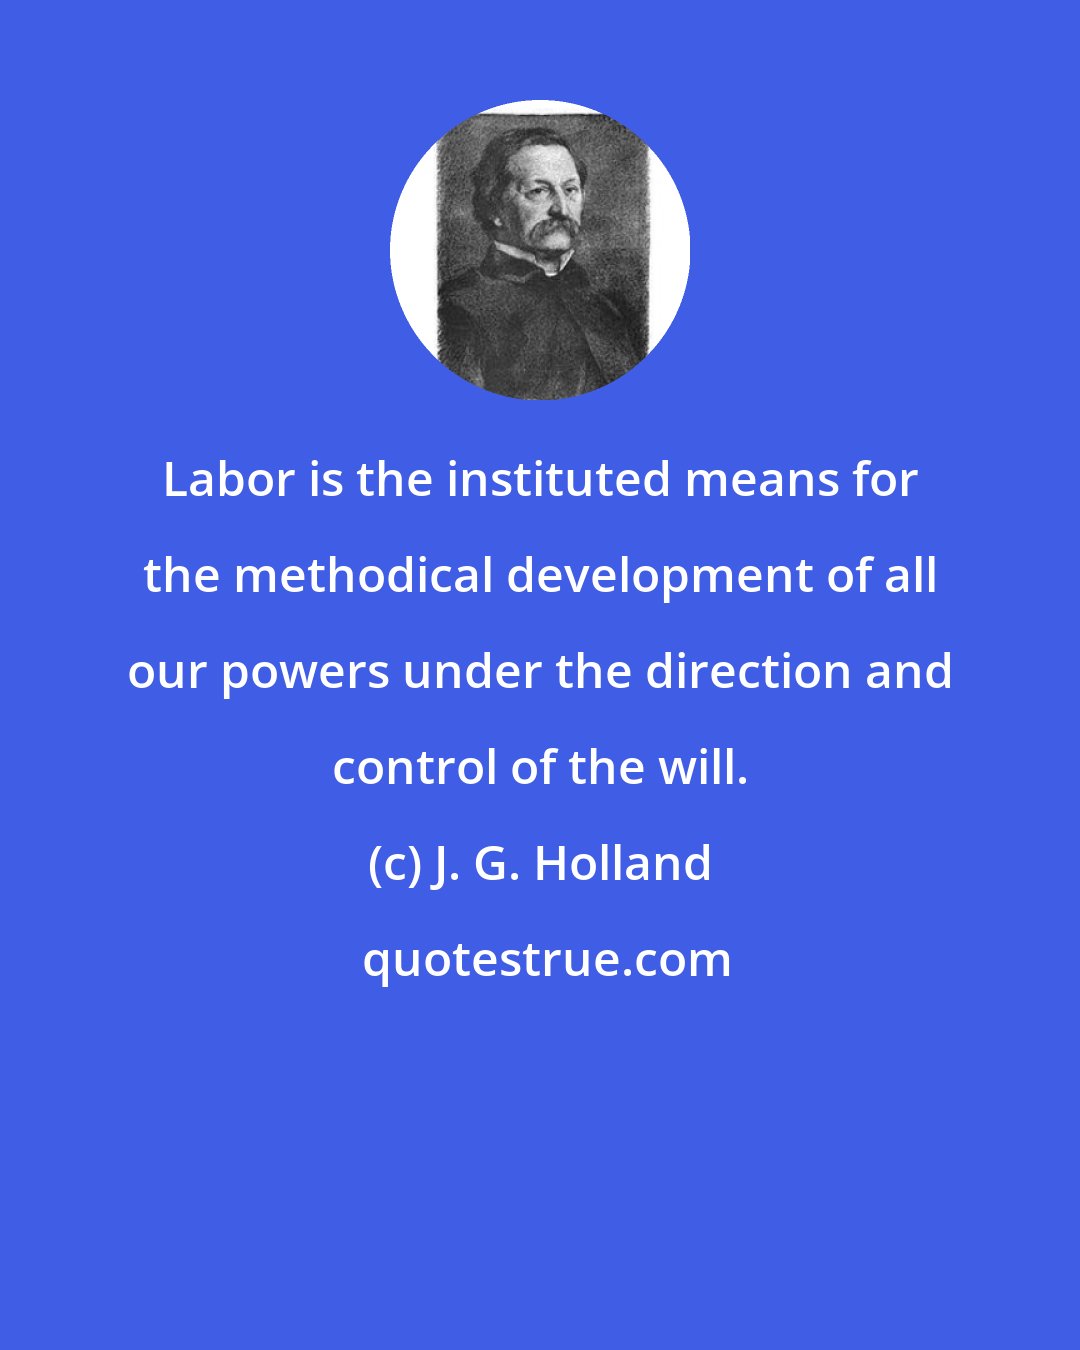 J. G. Holland: Labor is the instituted means for the methodical development of all our powers under the direction and control of the will.